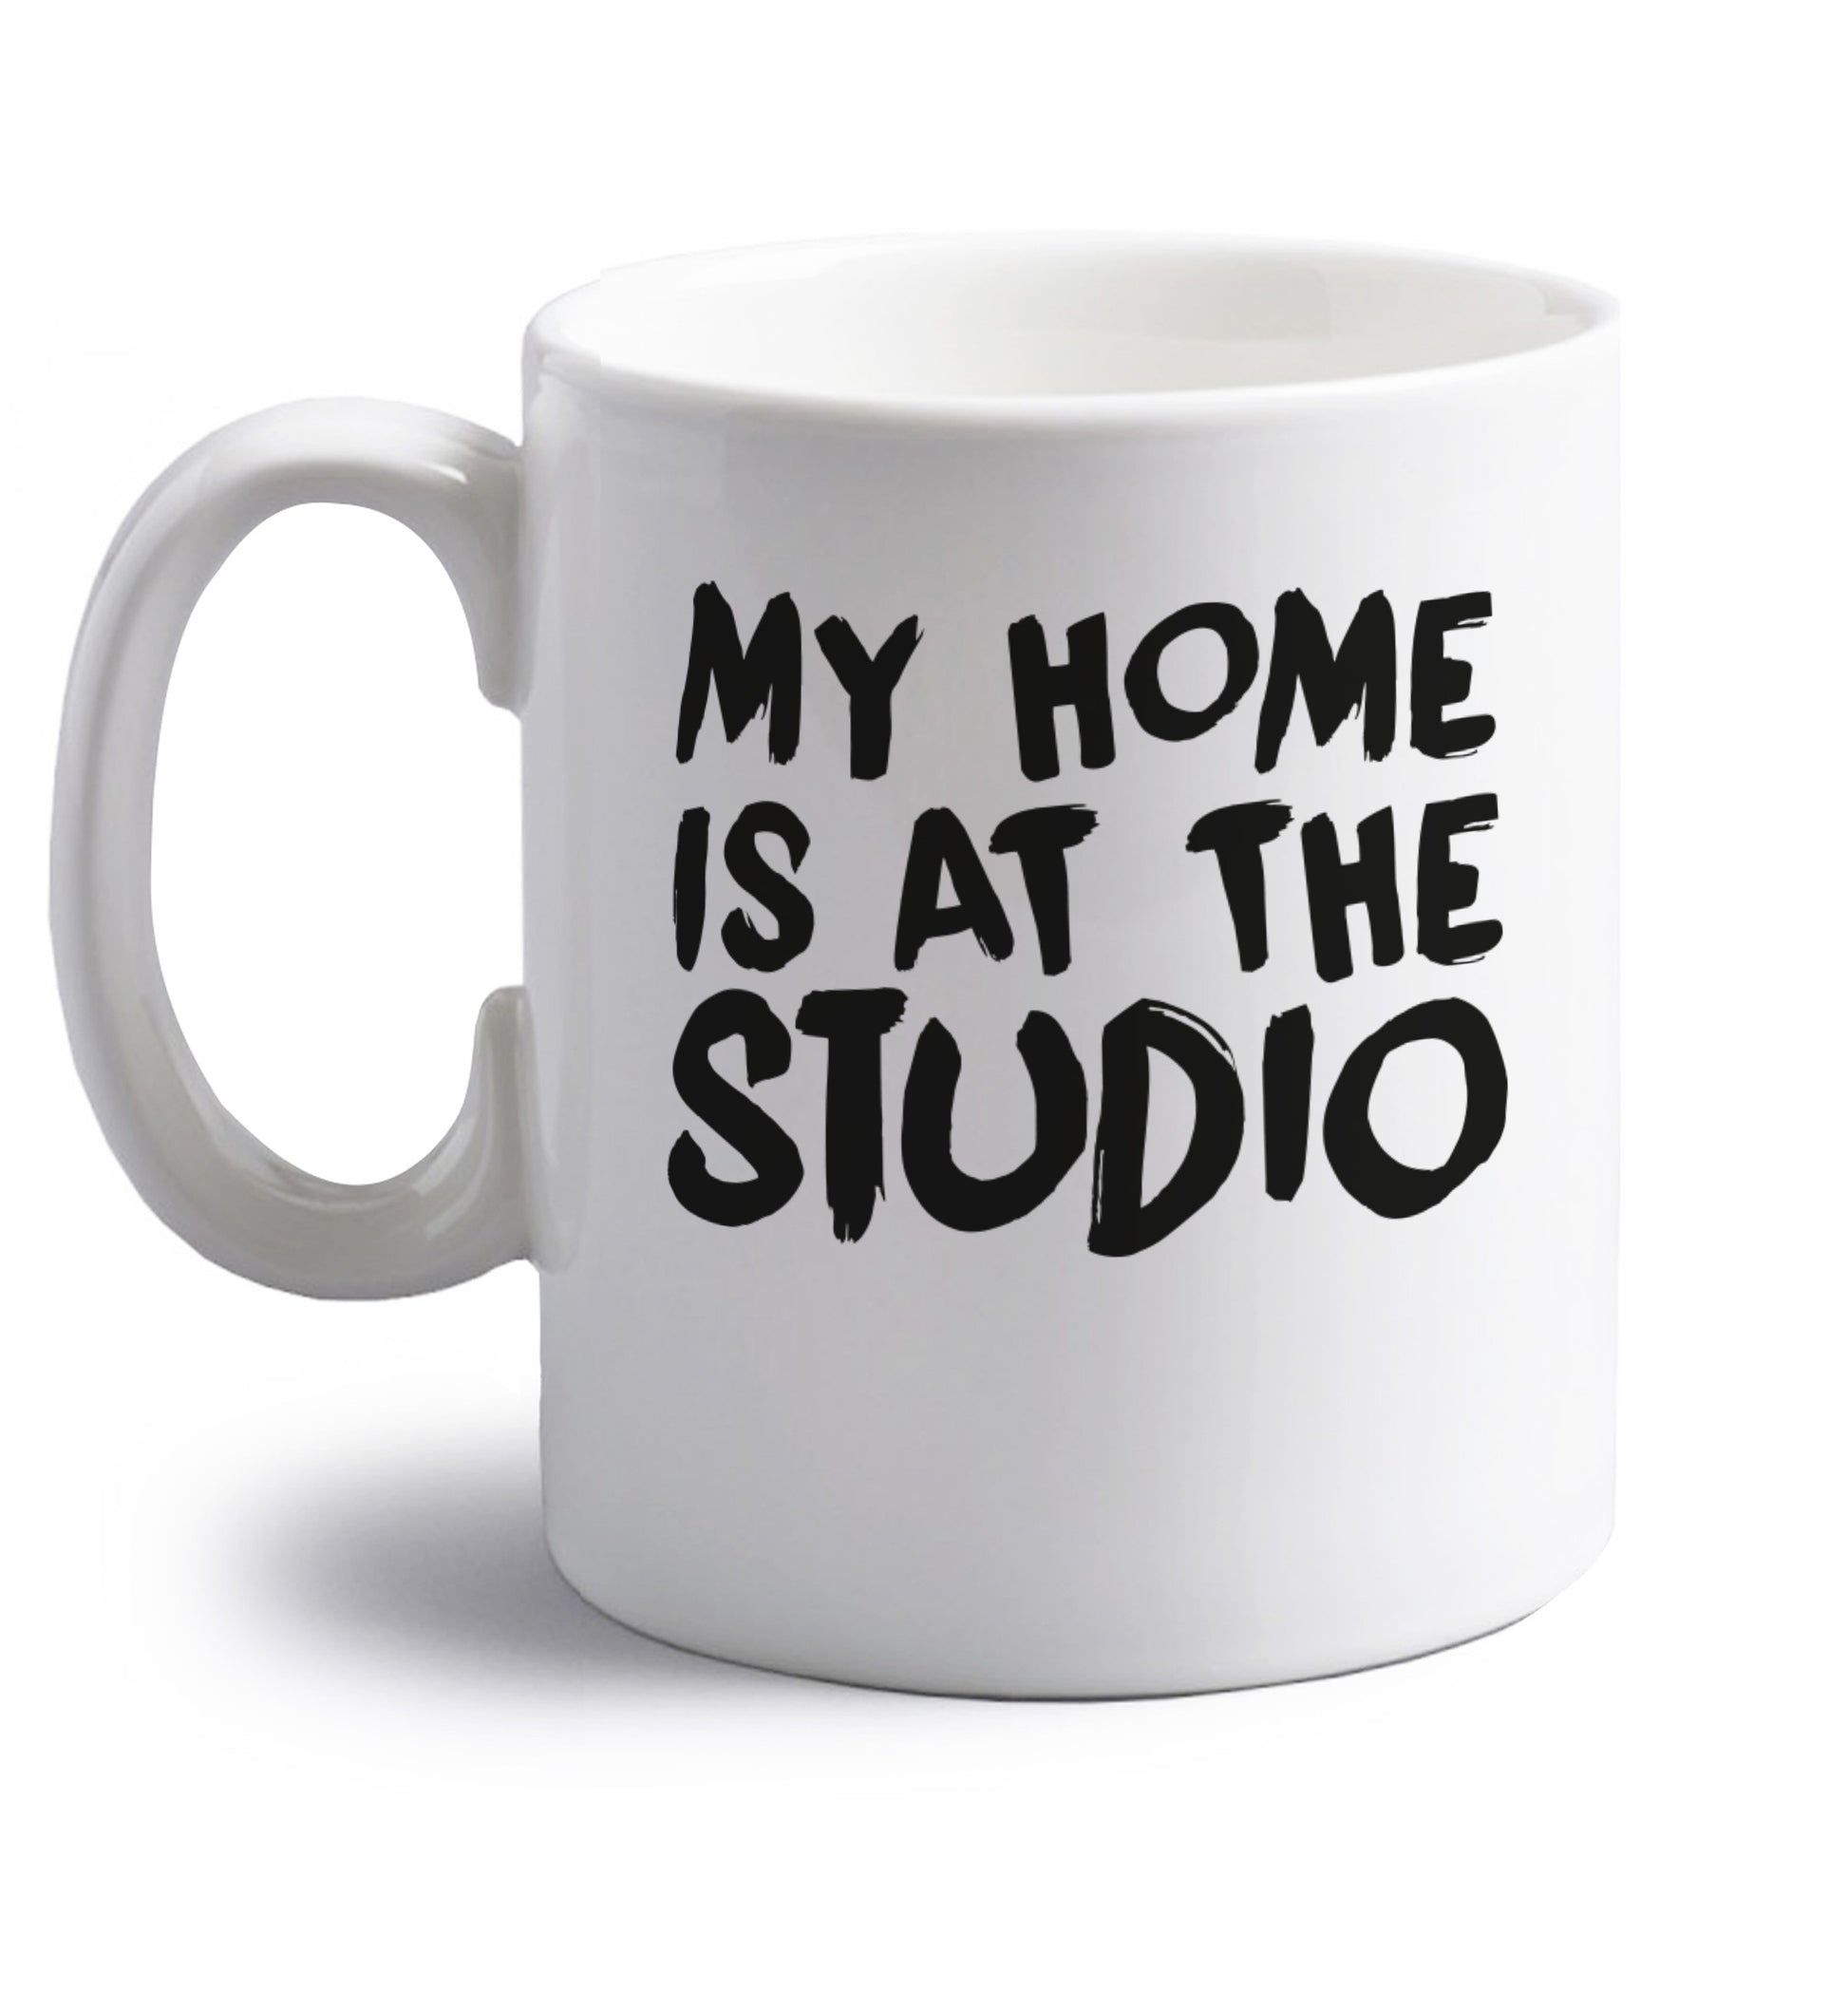 My home is at the studio right handed white ceramic mug 